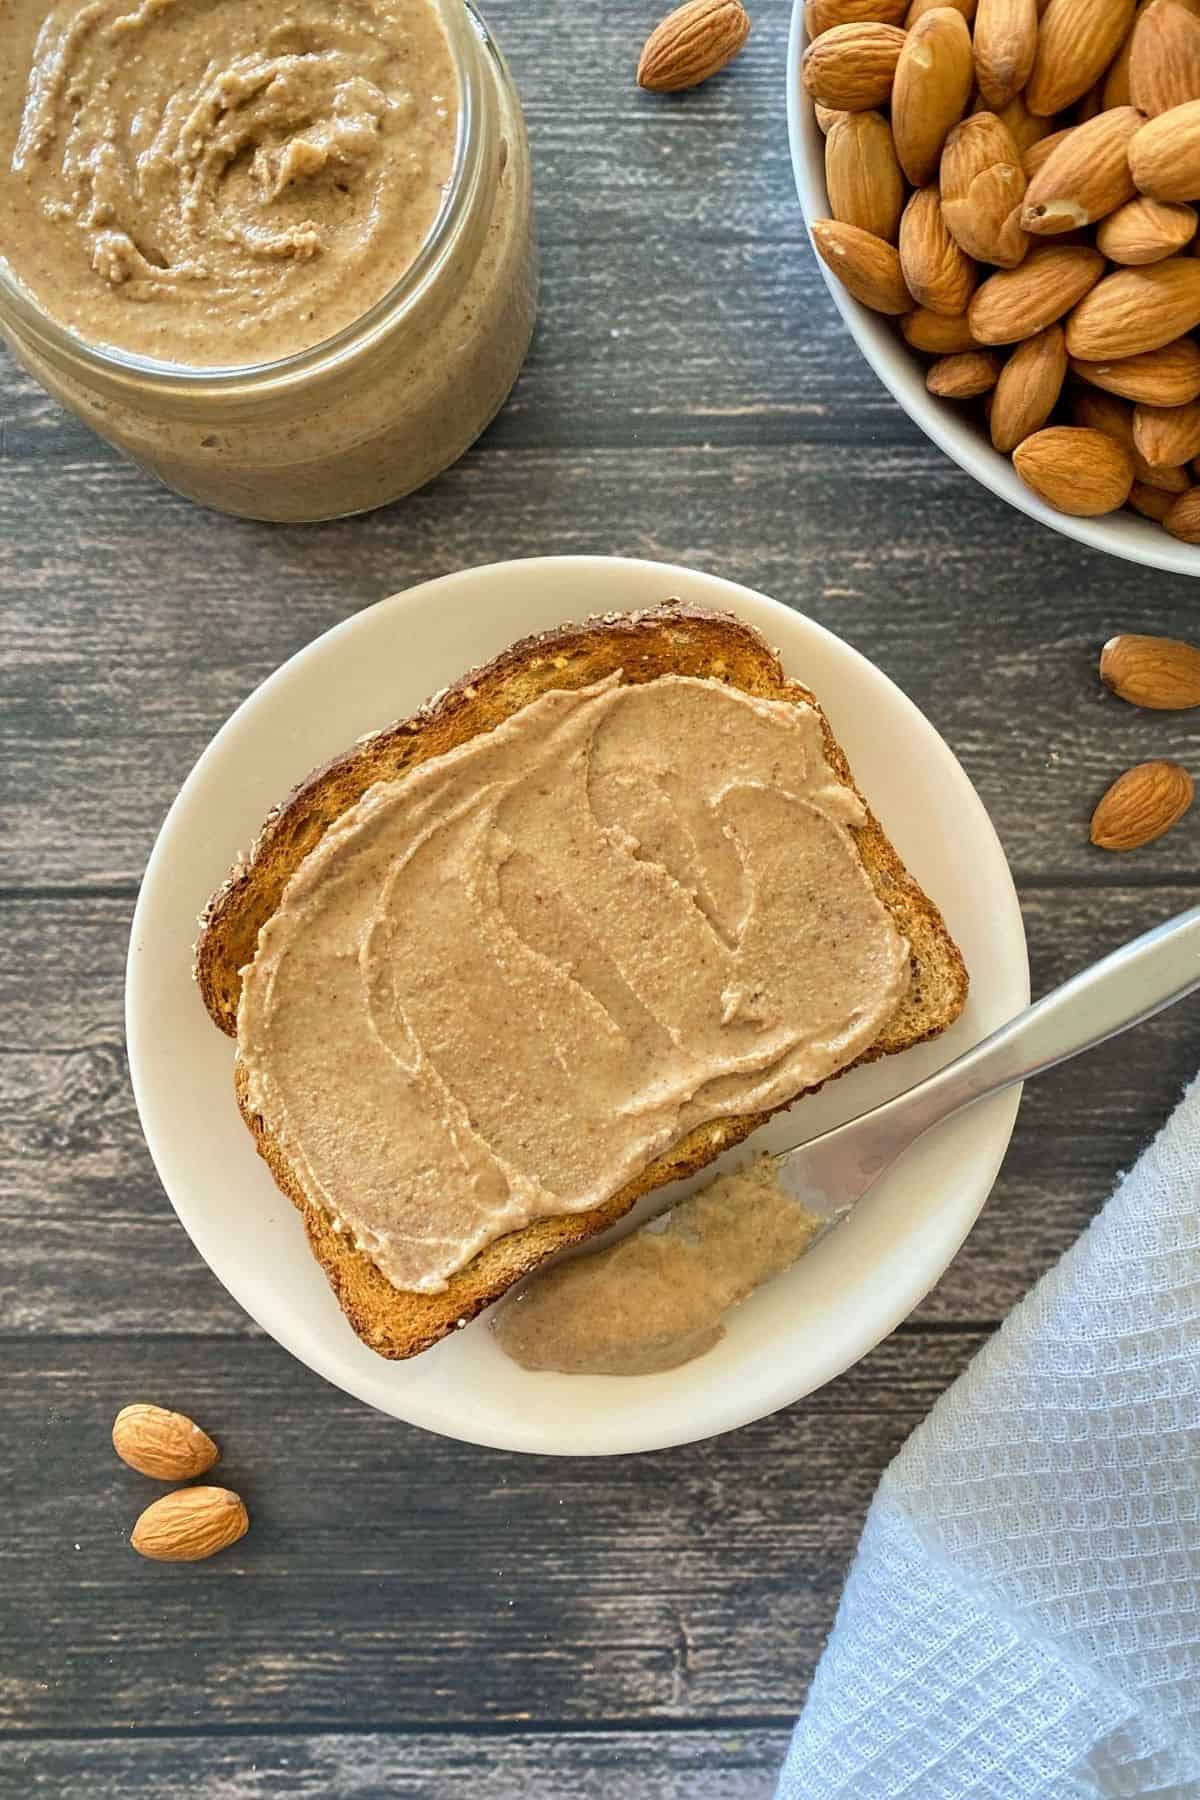 Toast with almond butter and knife beside it on white plate with bowl of almonds in background.